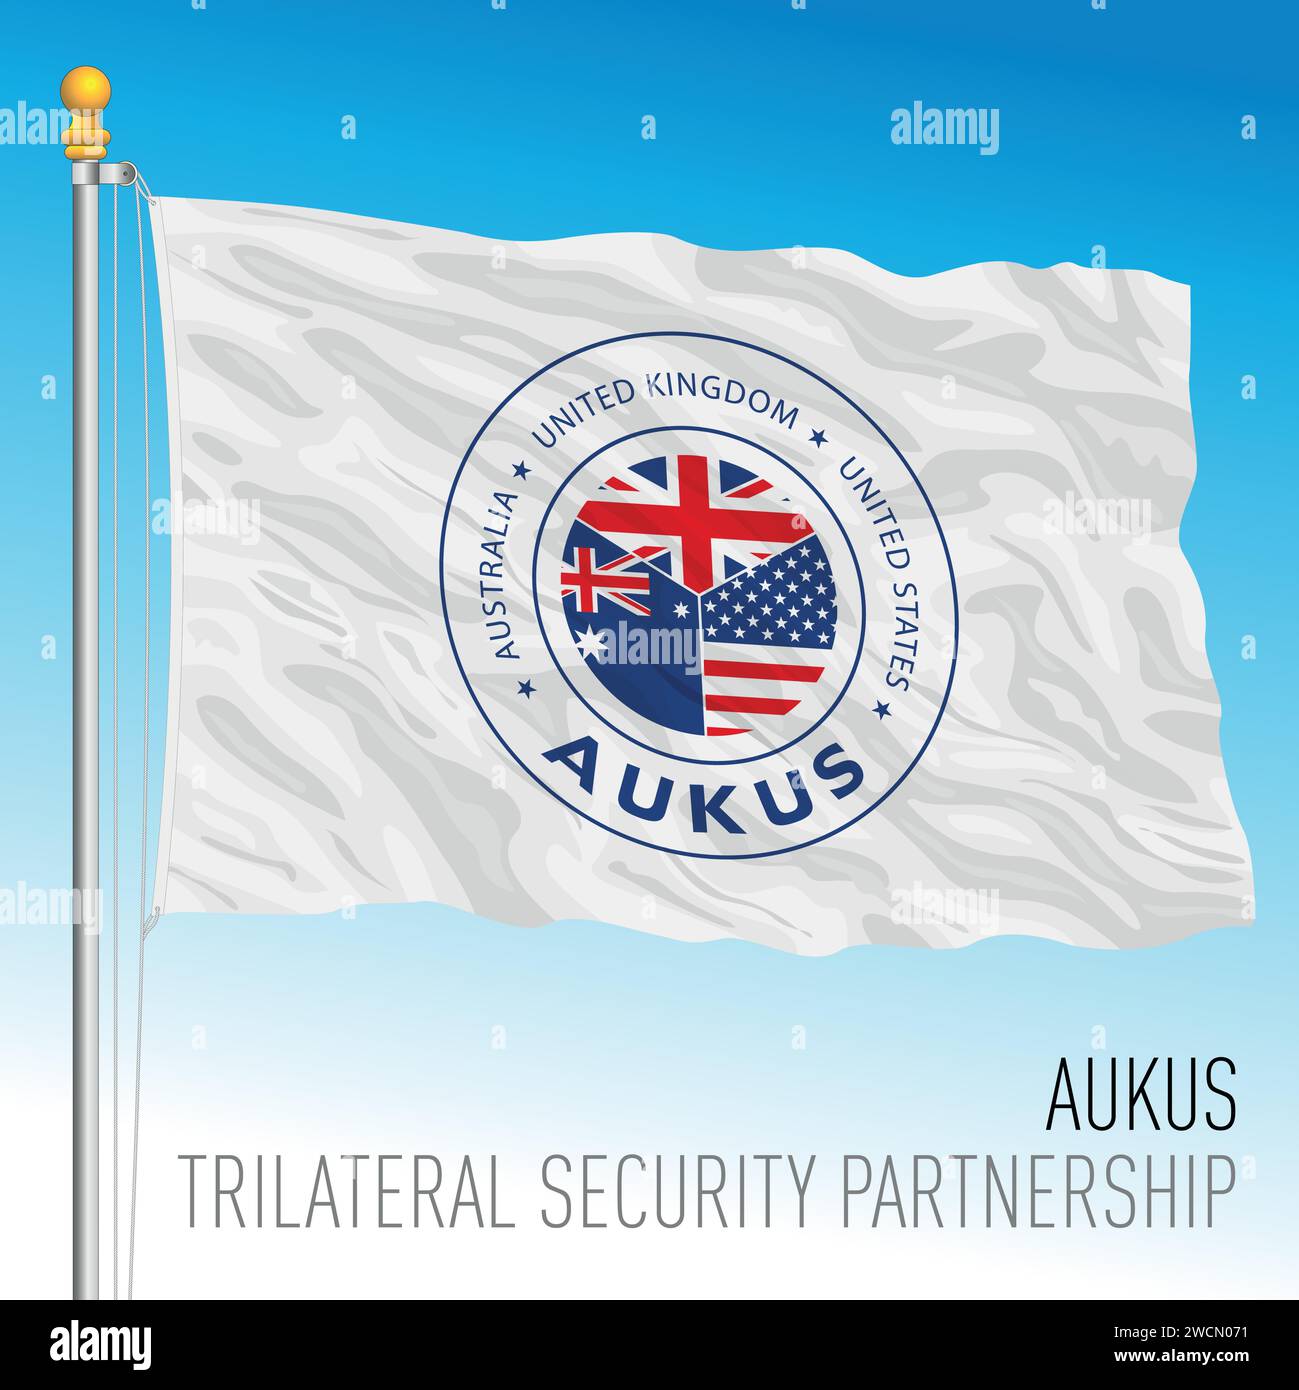 Aukus alliance waving flag, trilateral security partnership for the Indo-Pacific region, vector illustration Stock Vector